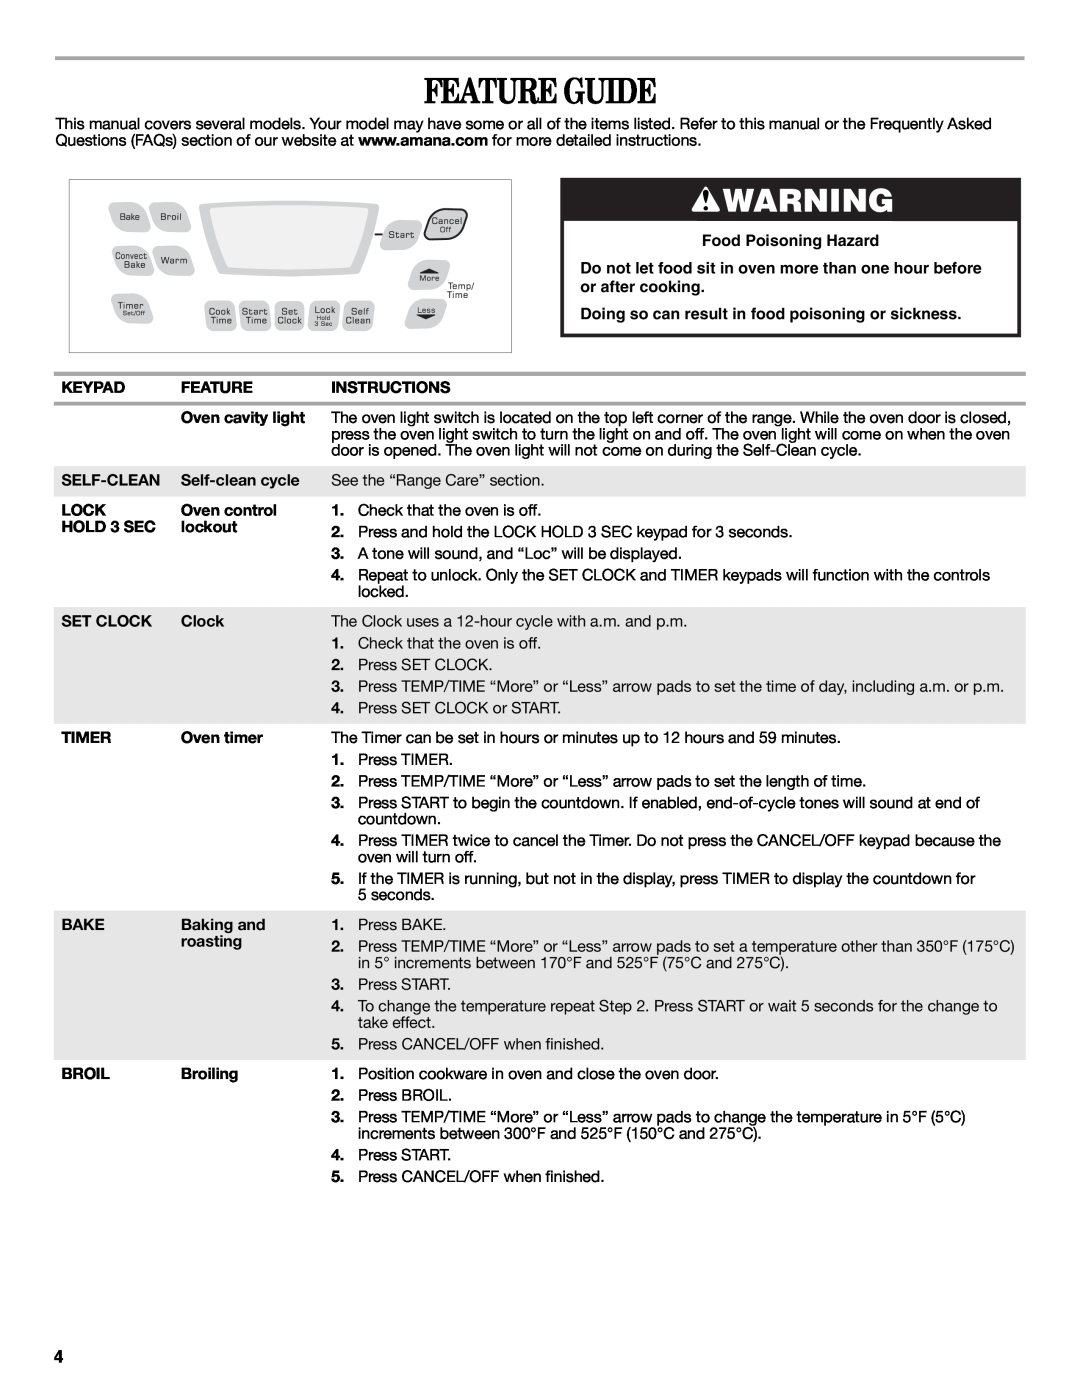 Amana AGR5844VDW warranty Feature Guide, Food Poisoning Hazard, Doing so can result in food poisoning or sickness 